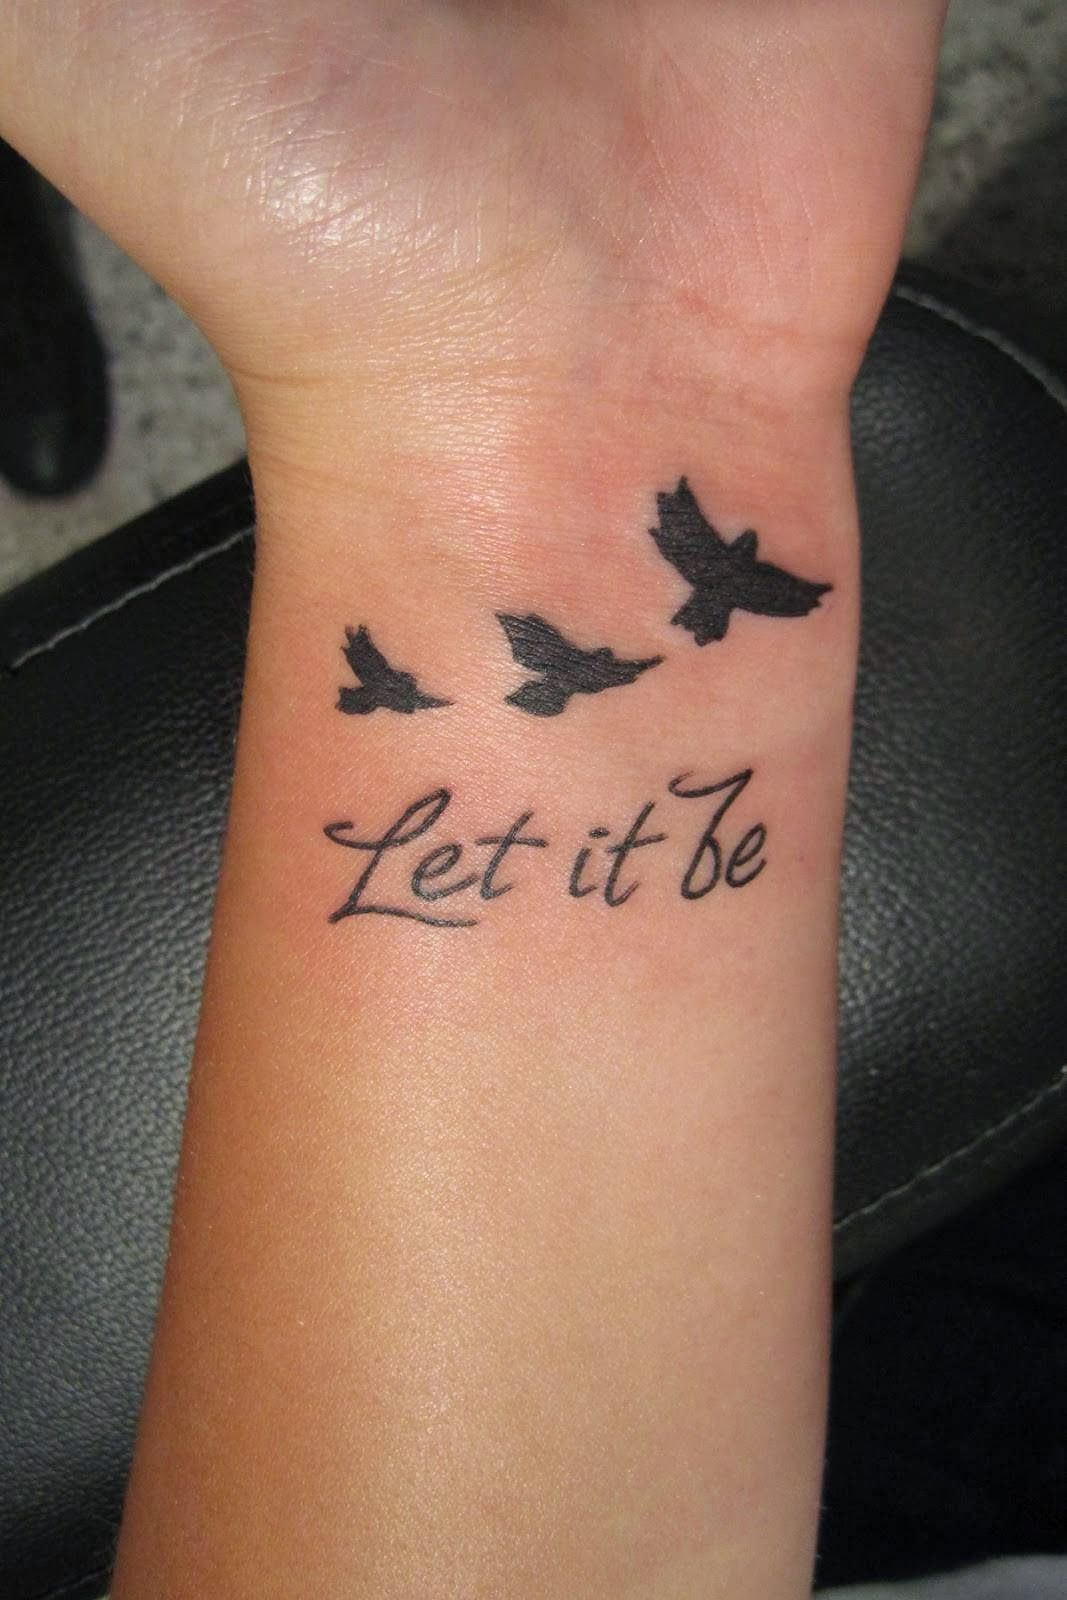 Let It Be Writing And Flying Birds Tattoo On Wrist Tattoo Mania pertaining to sizing 1067 X 1600